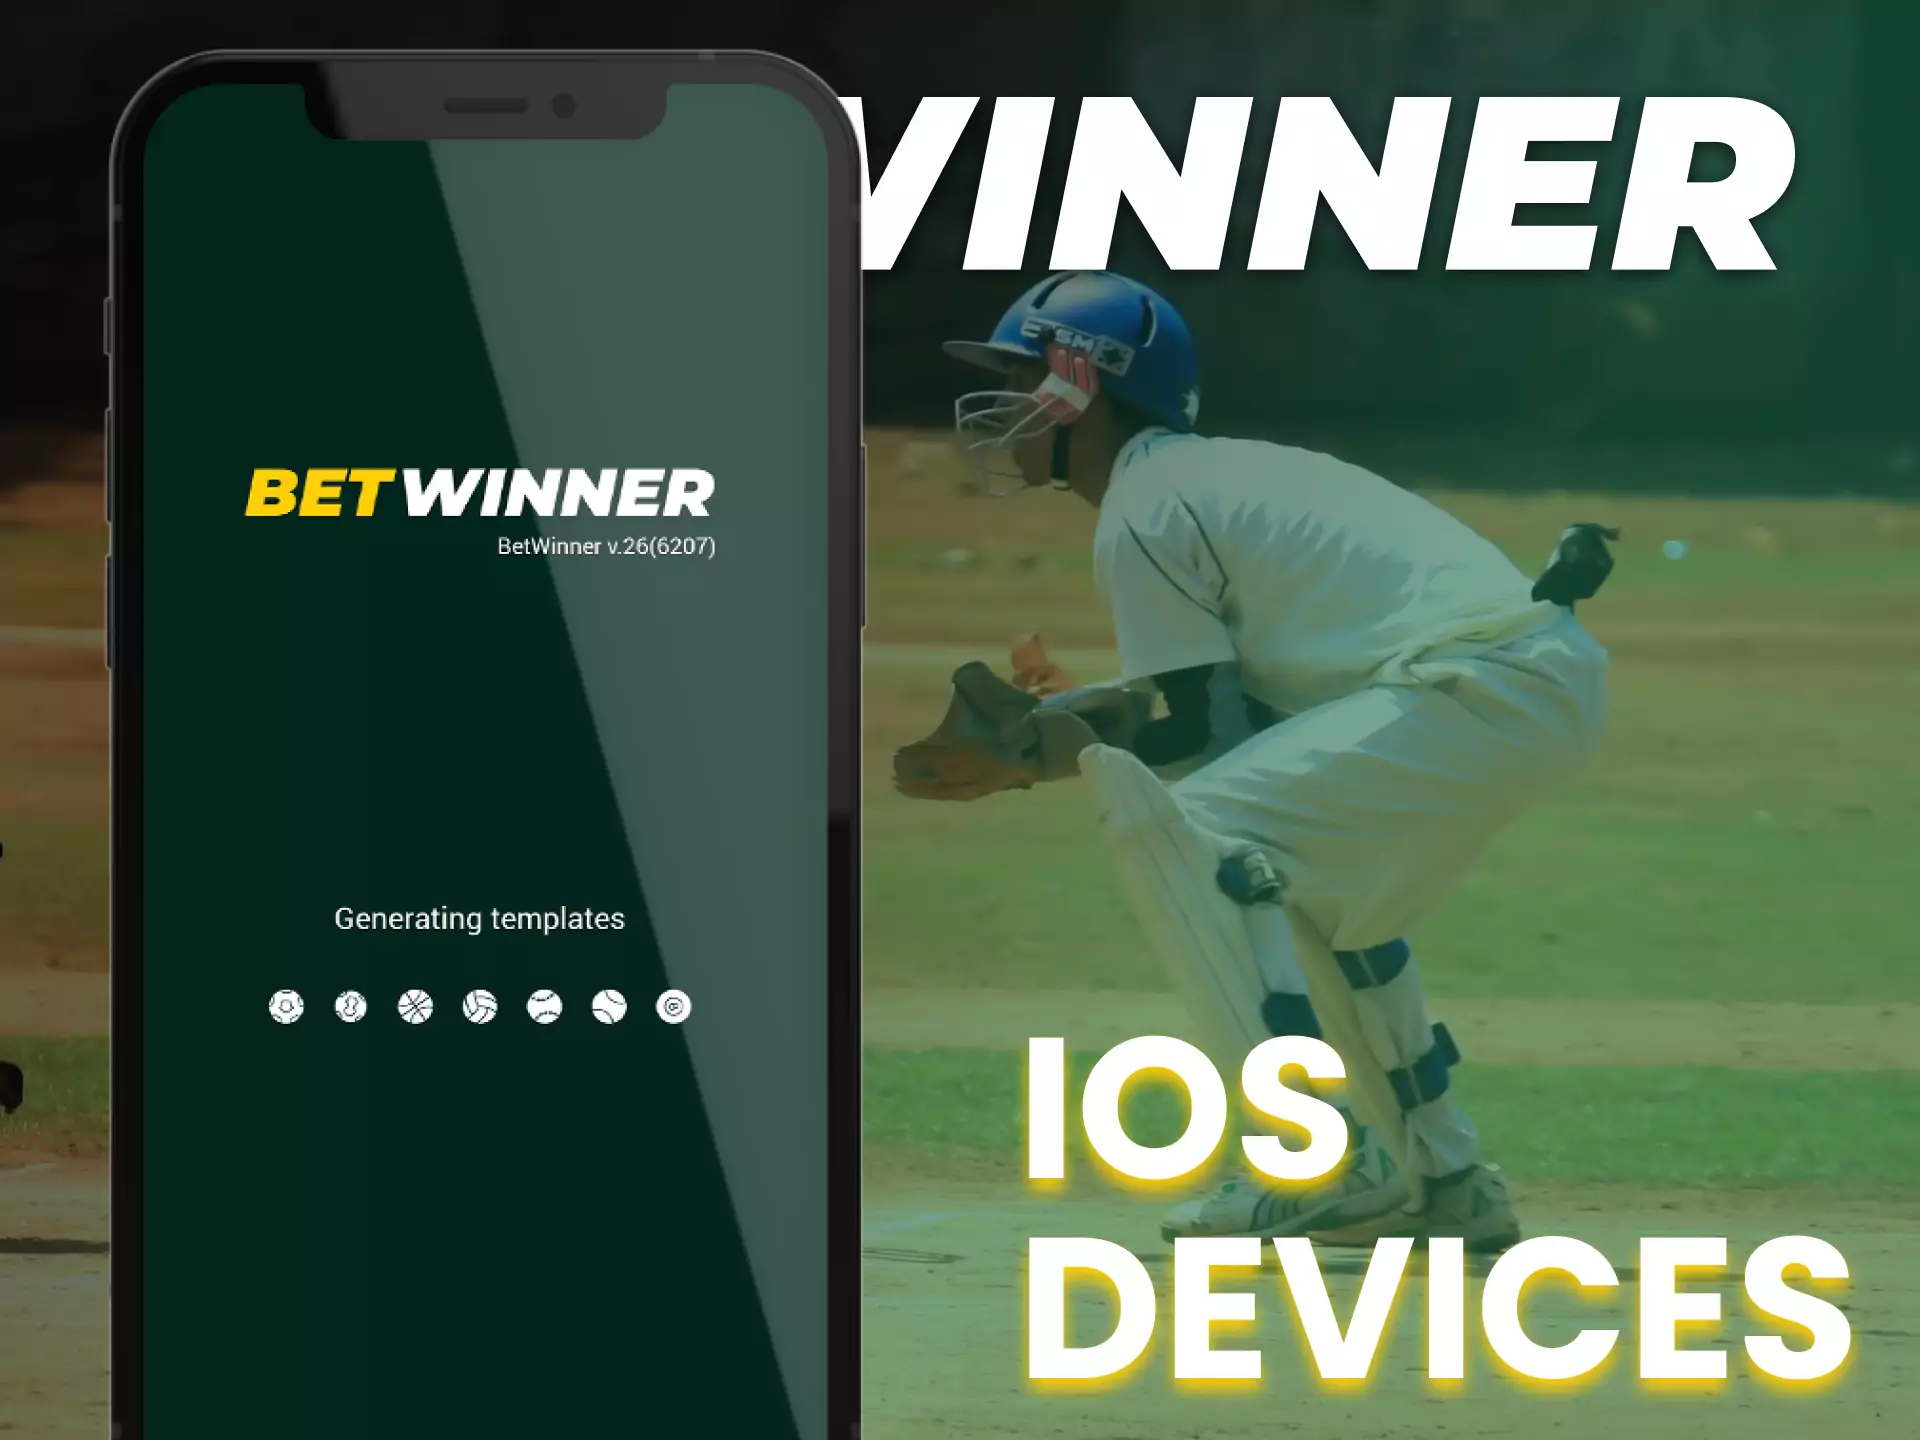 The Betwinner app works on many iOS devices.